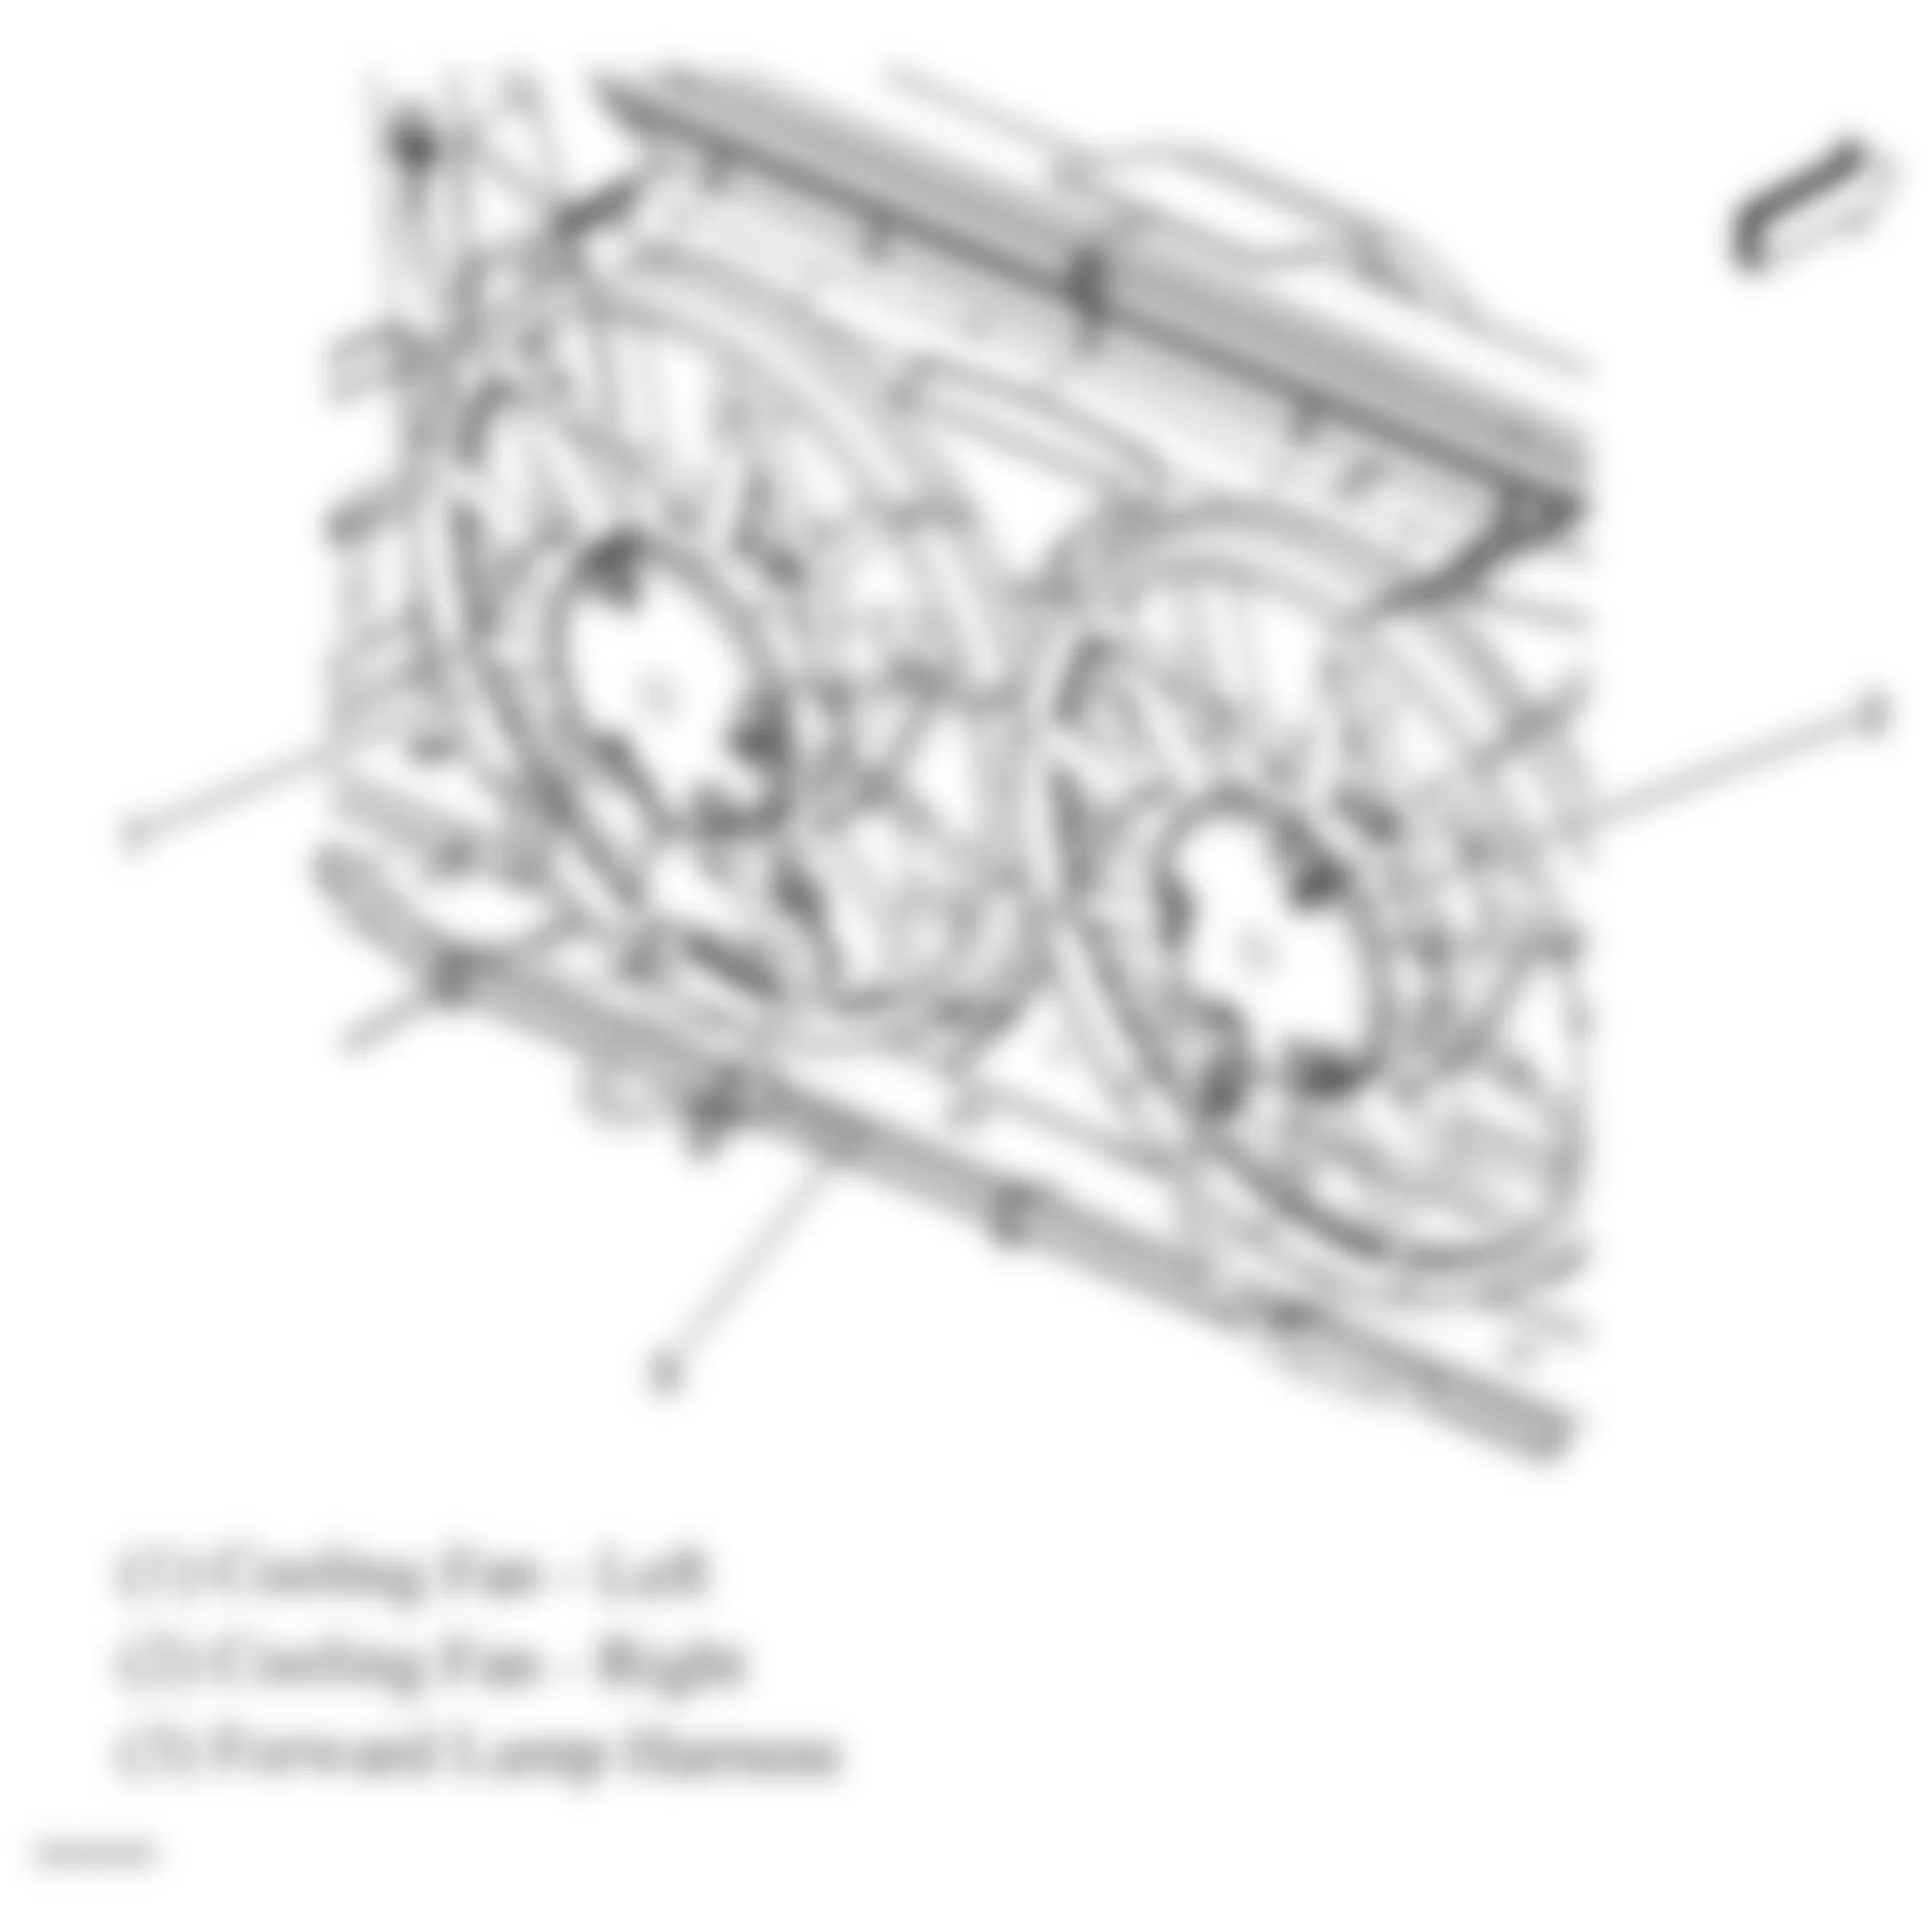 Chevrolet Silverado 3500 HD 2010 - Component Locations -  Engine Cooling Fans (10 Series)